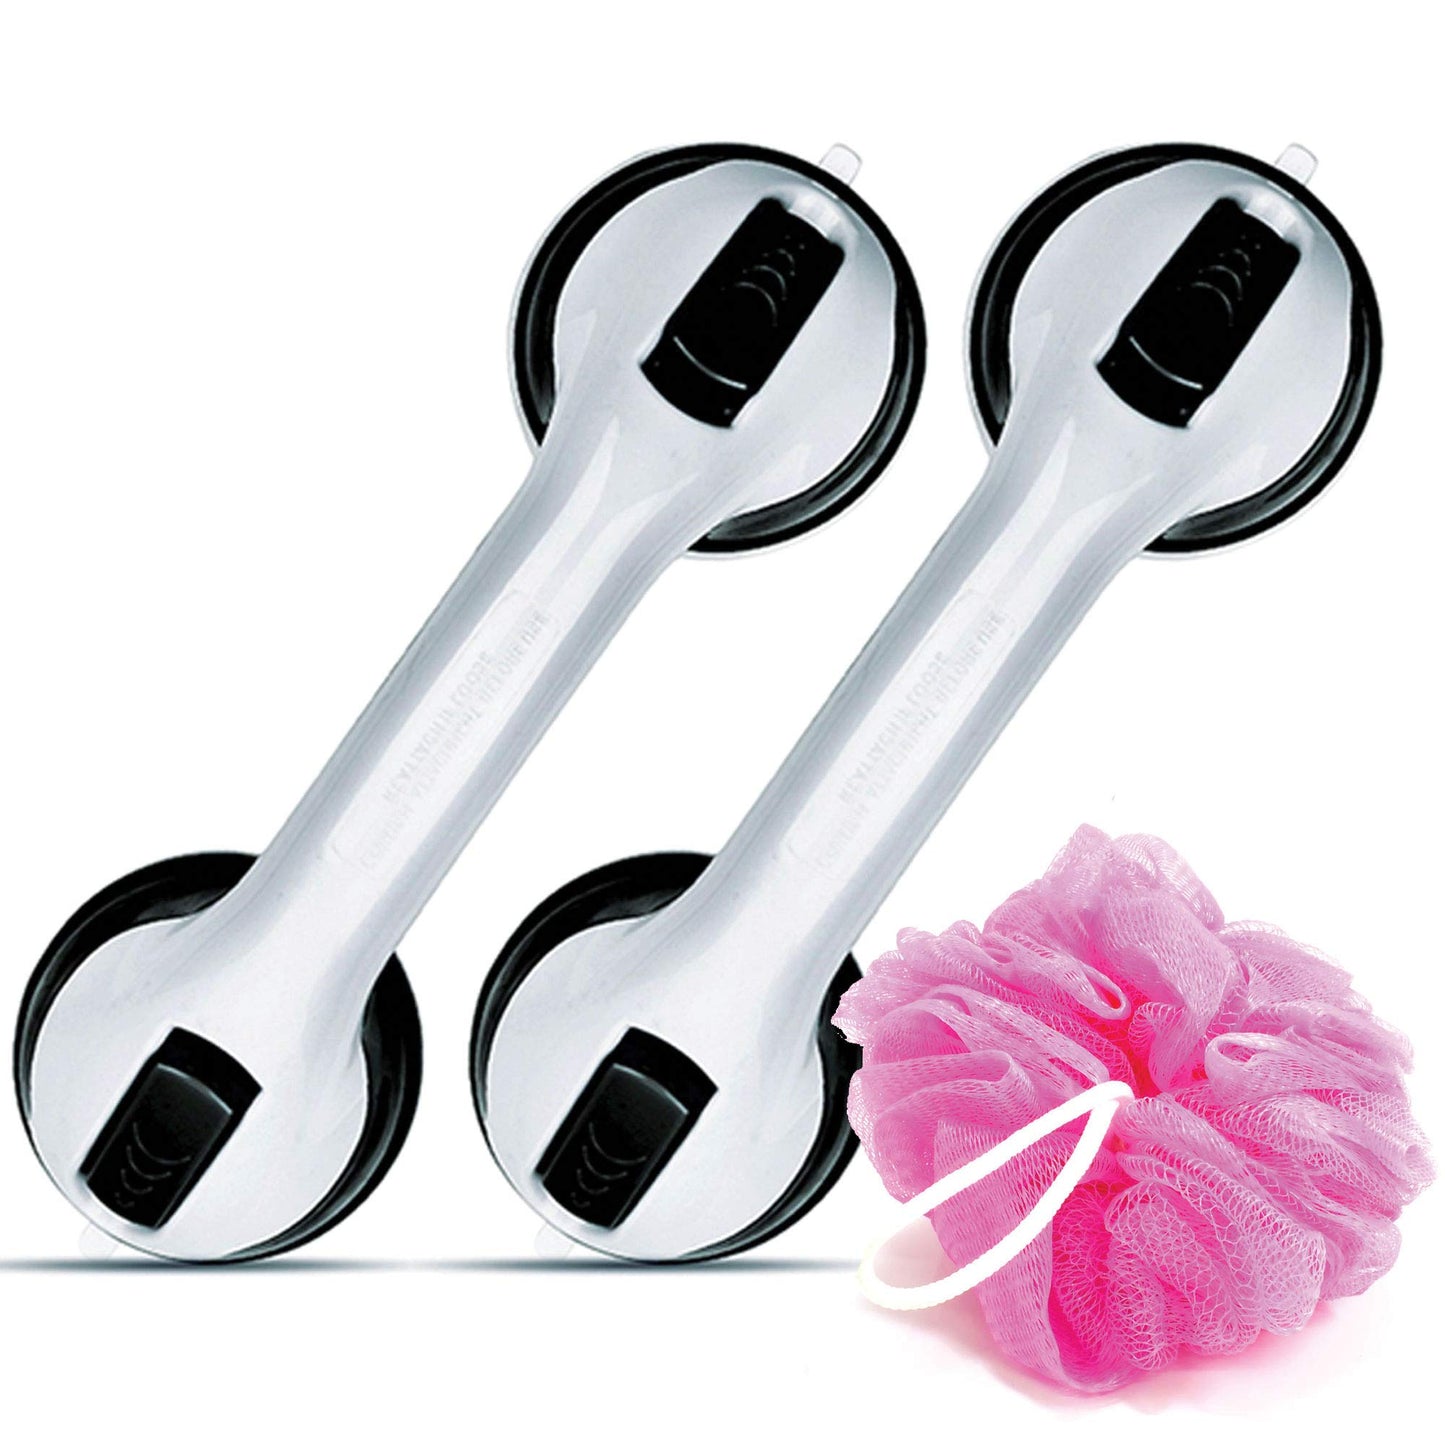 Two Suction Grab-Bars